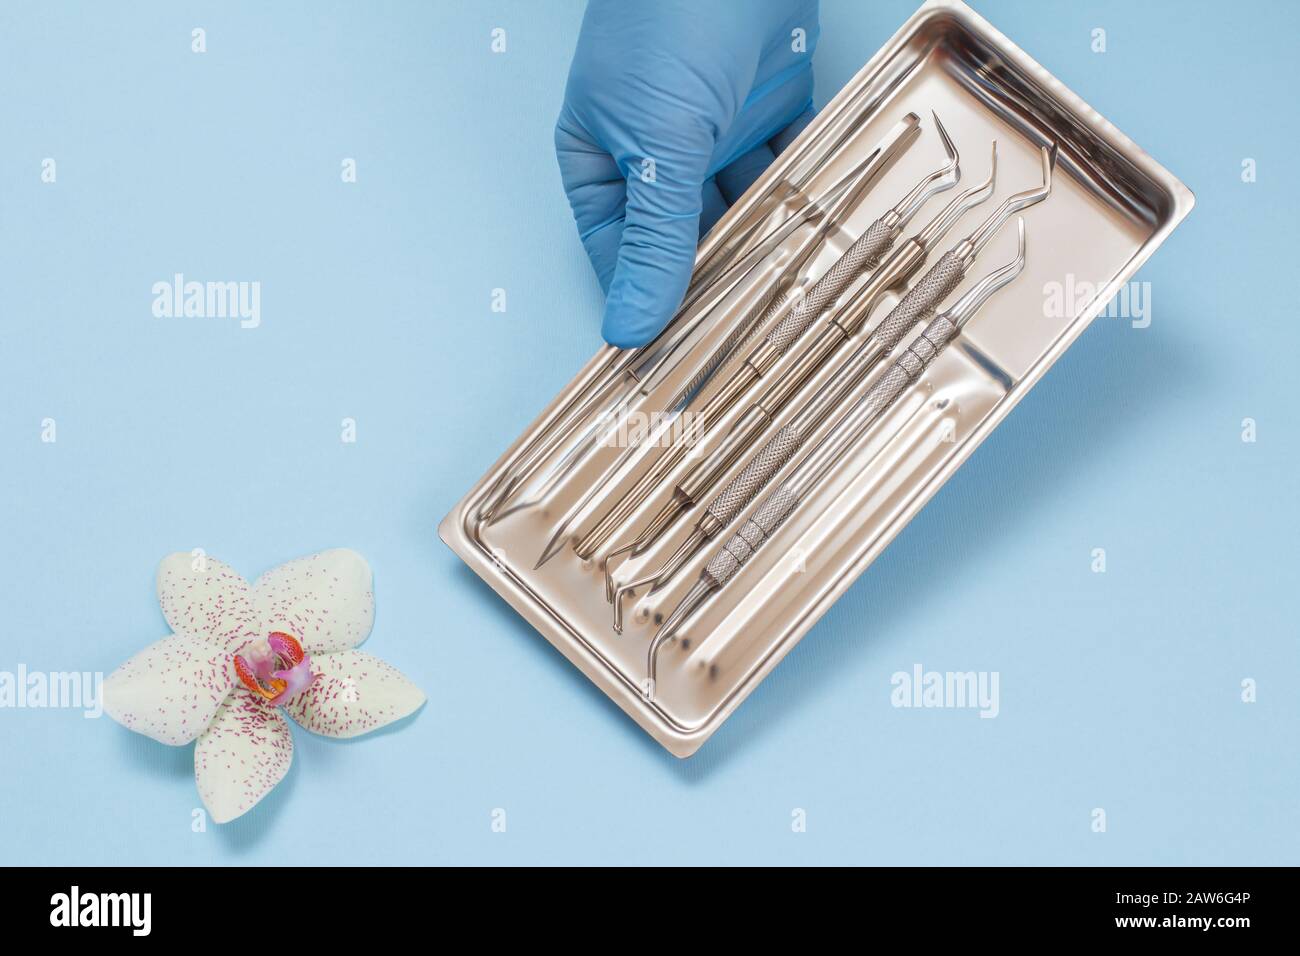 Dentist's hand in a rubber glove with set of composite filling instruments for dental treatment in steel tray. Medical tools concept. Top view. Stock Photo